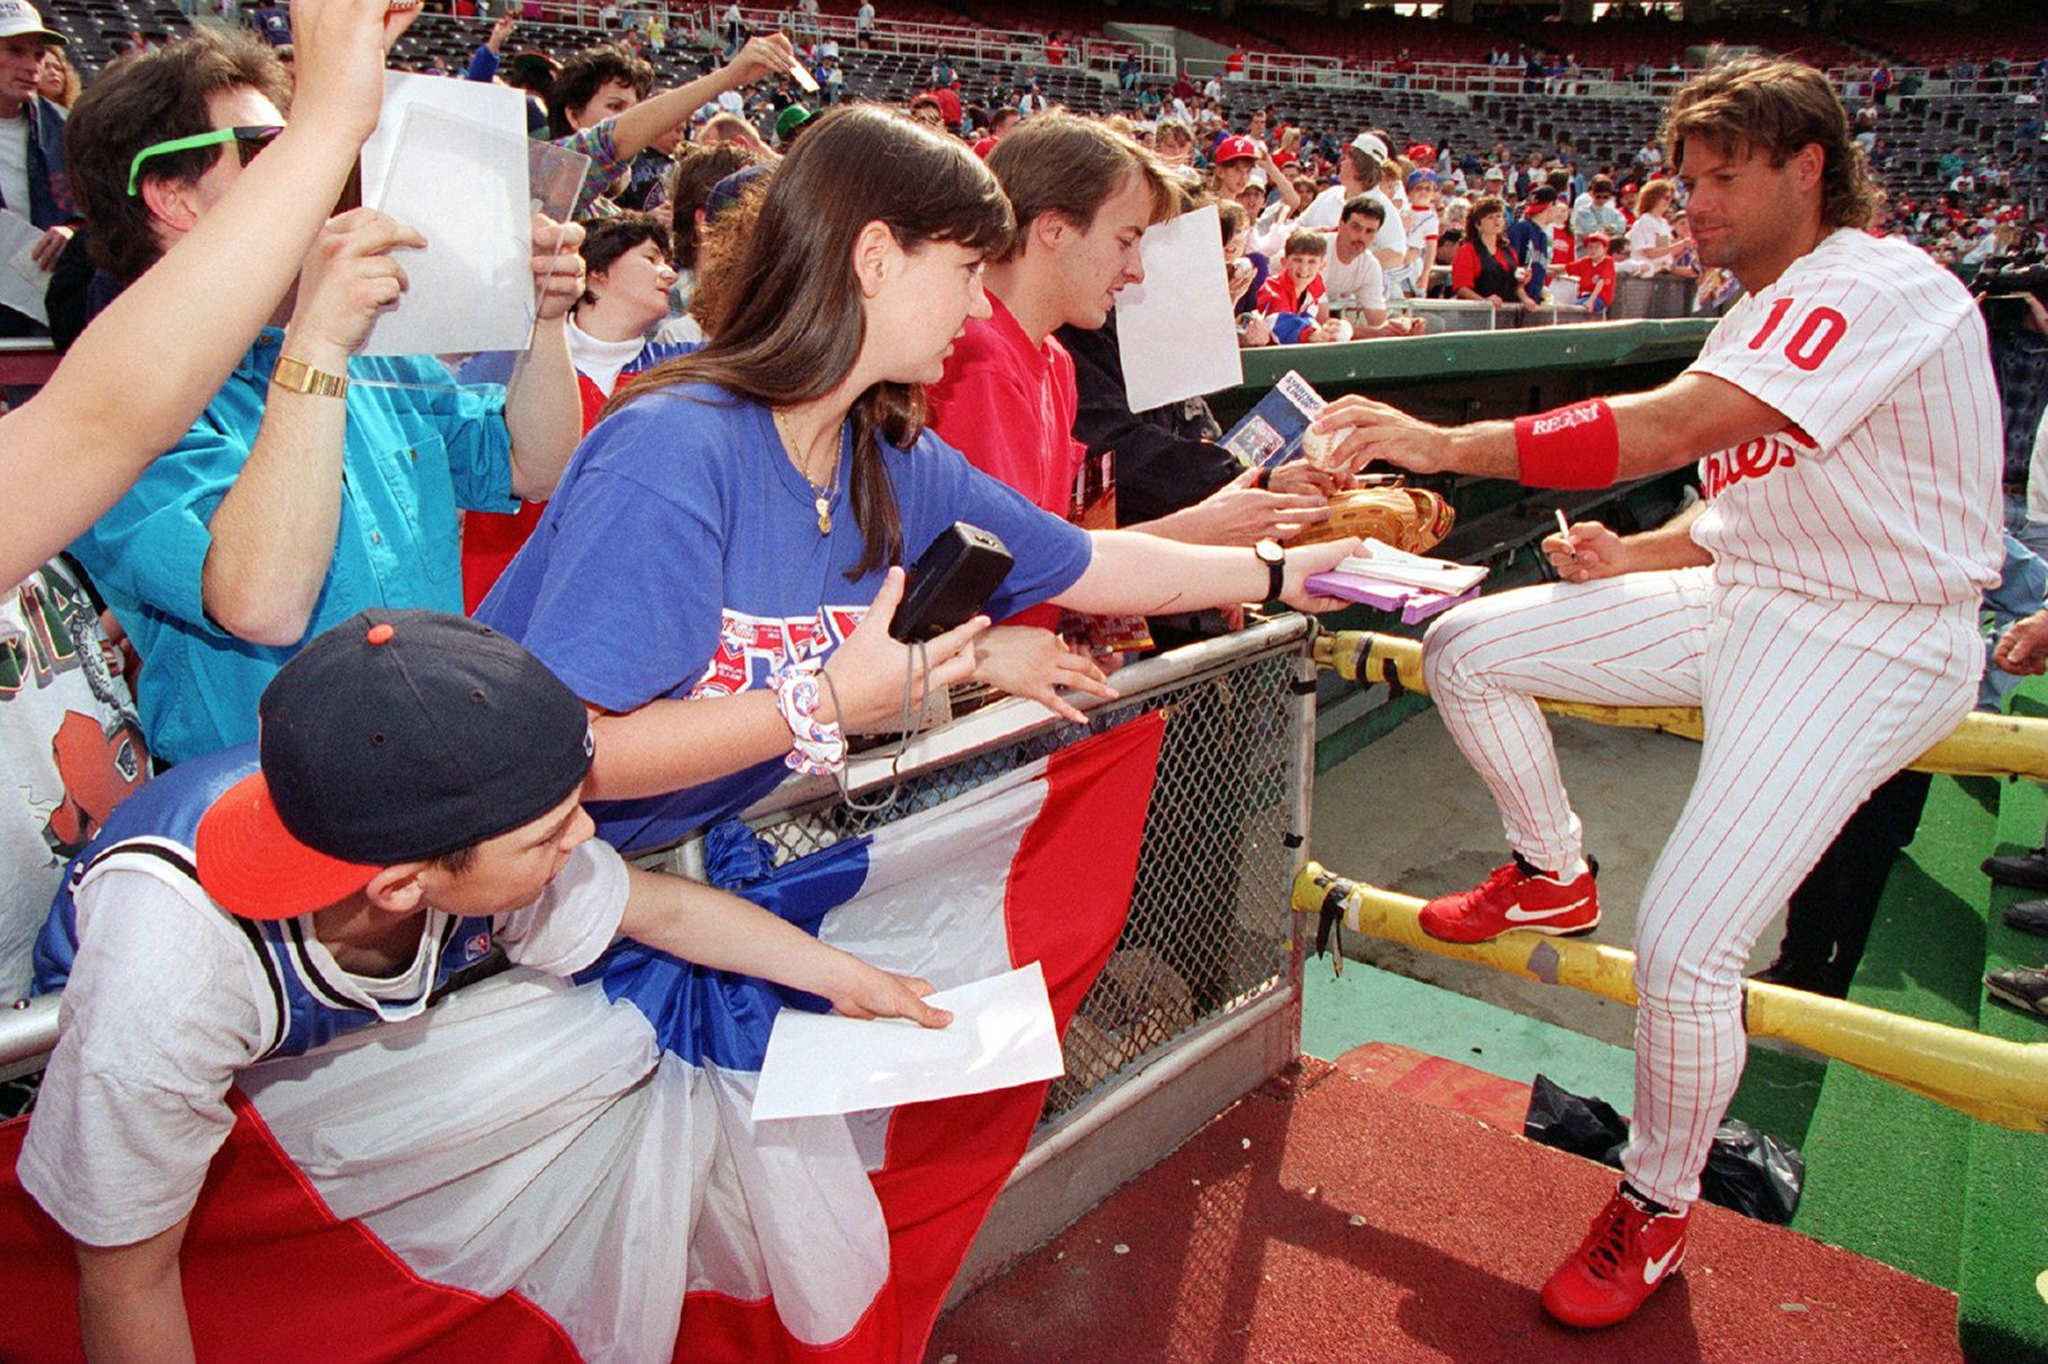 Darren Daulton Was the Heartbeat of a Rowdy Phillies Bunch - The New York  Times